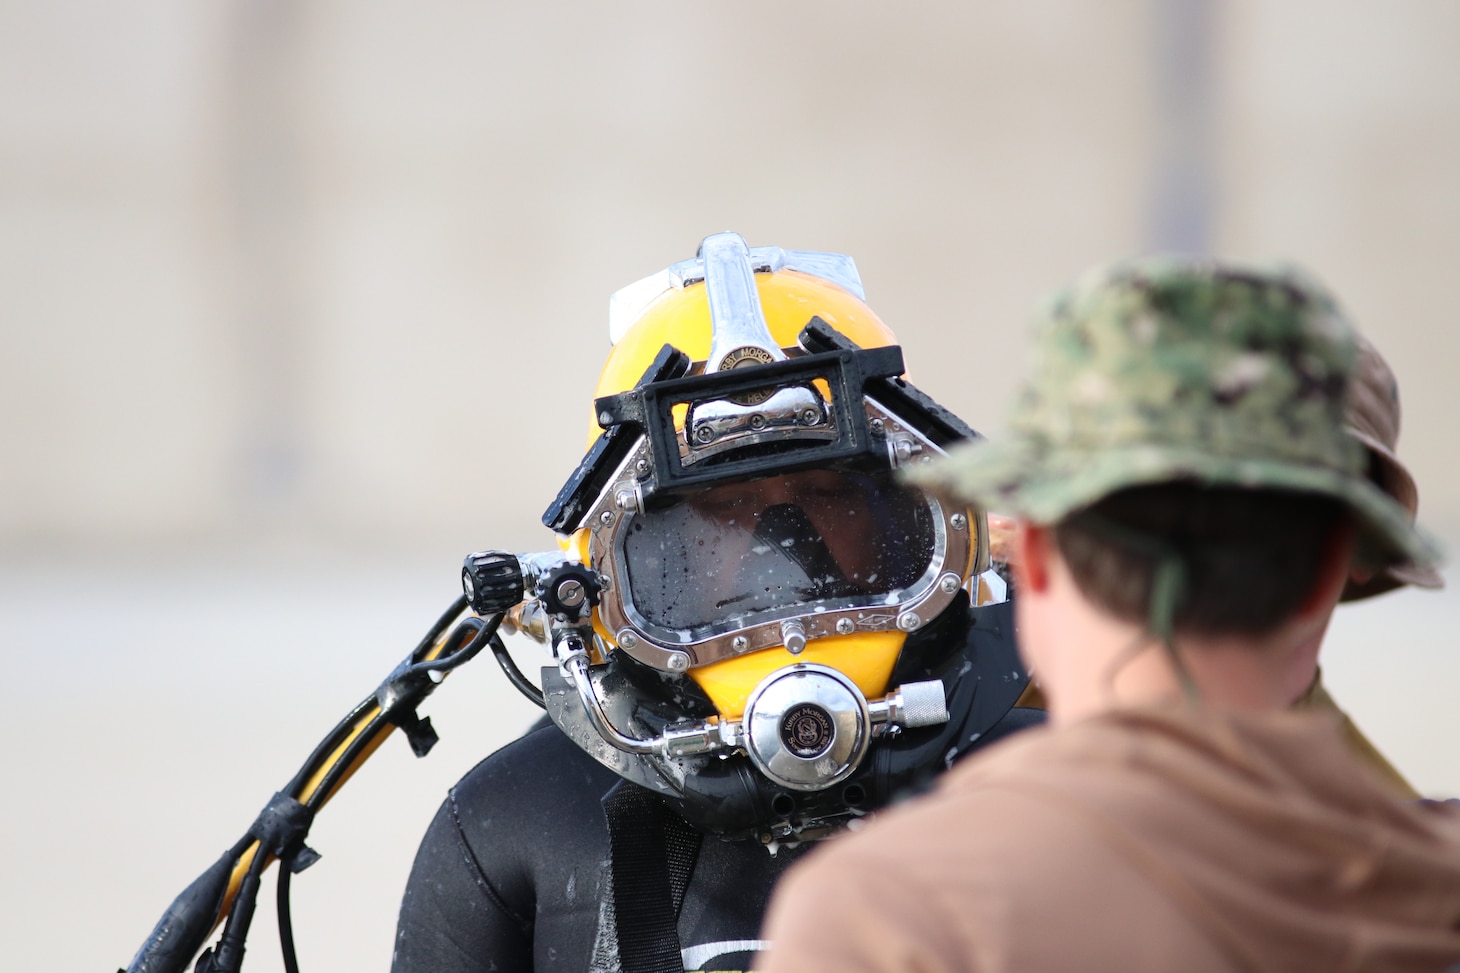 Navy divers from the Royal Moroccan Navy and the U.S. Navy’s Underwater Construction Team 1 conduct surface checks prior to entering the water during bilateral diving operations in Ksar Sghir, Morocco, Nov. 23, 2022.